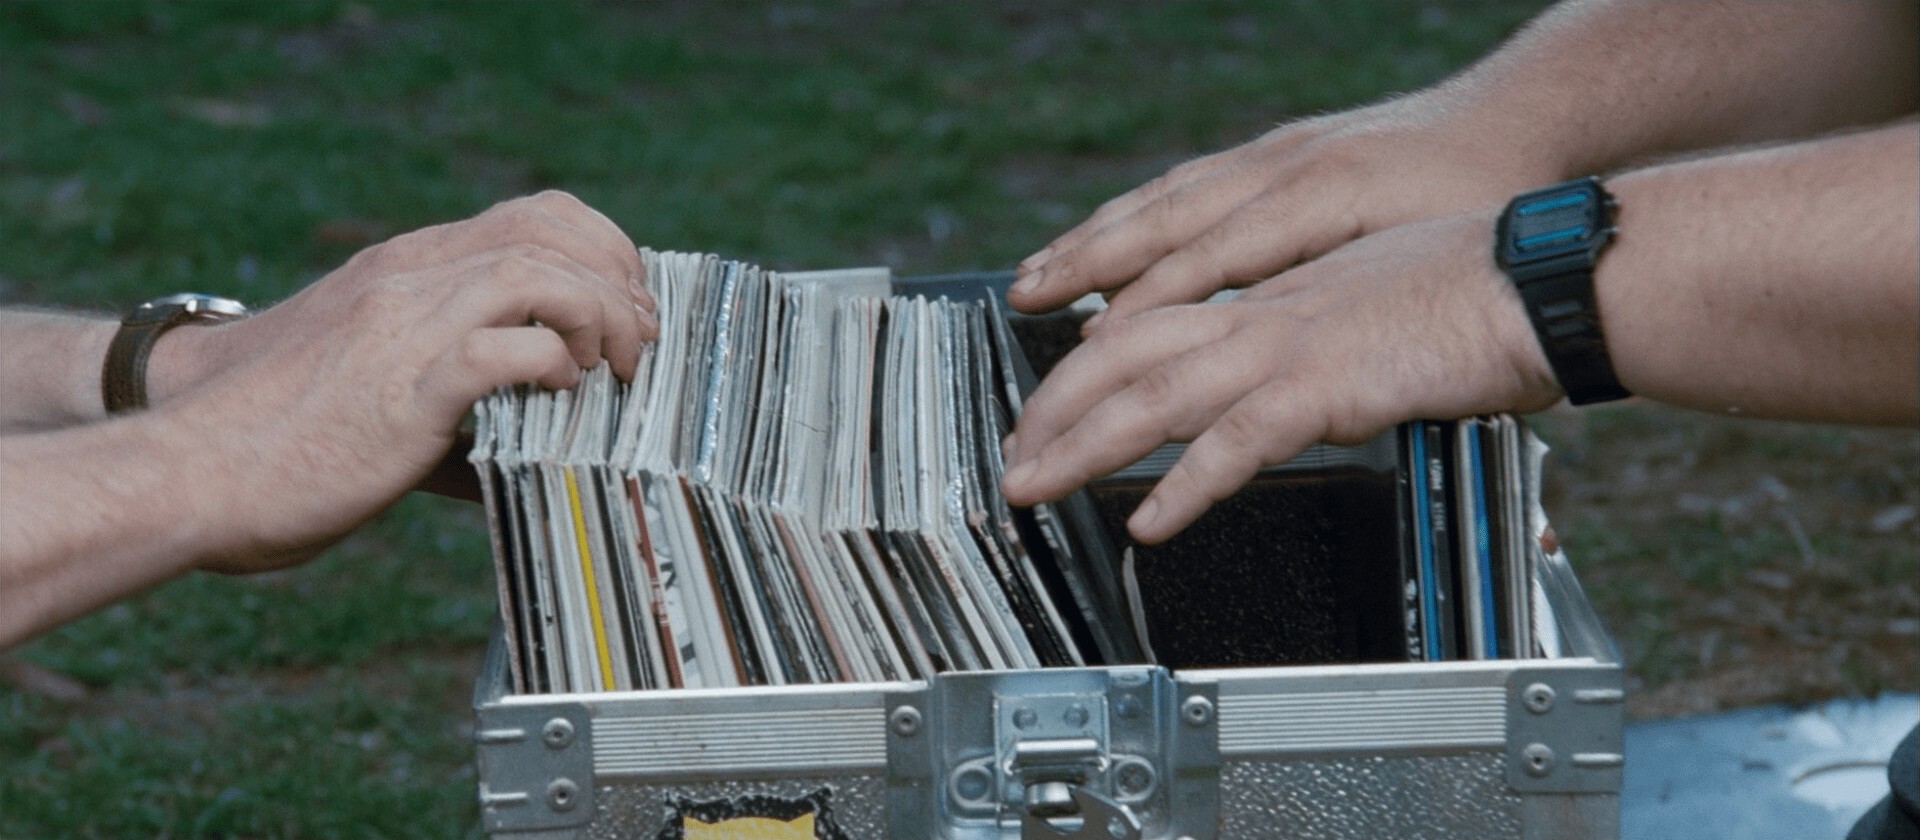 Picture of 4 hands going through a box of vinyls to find a song